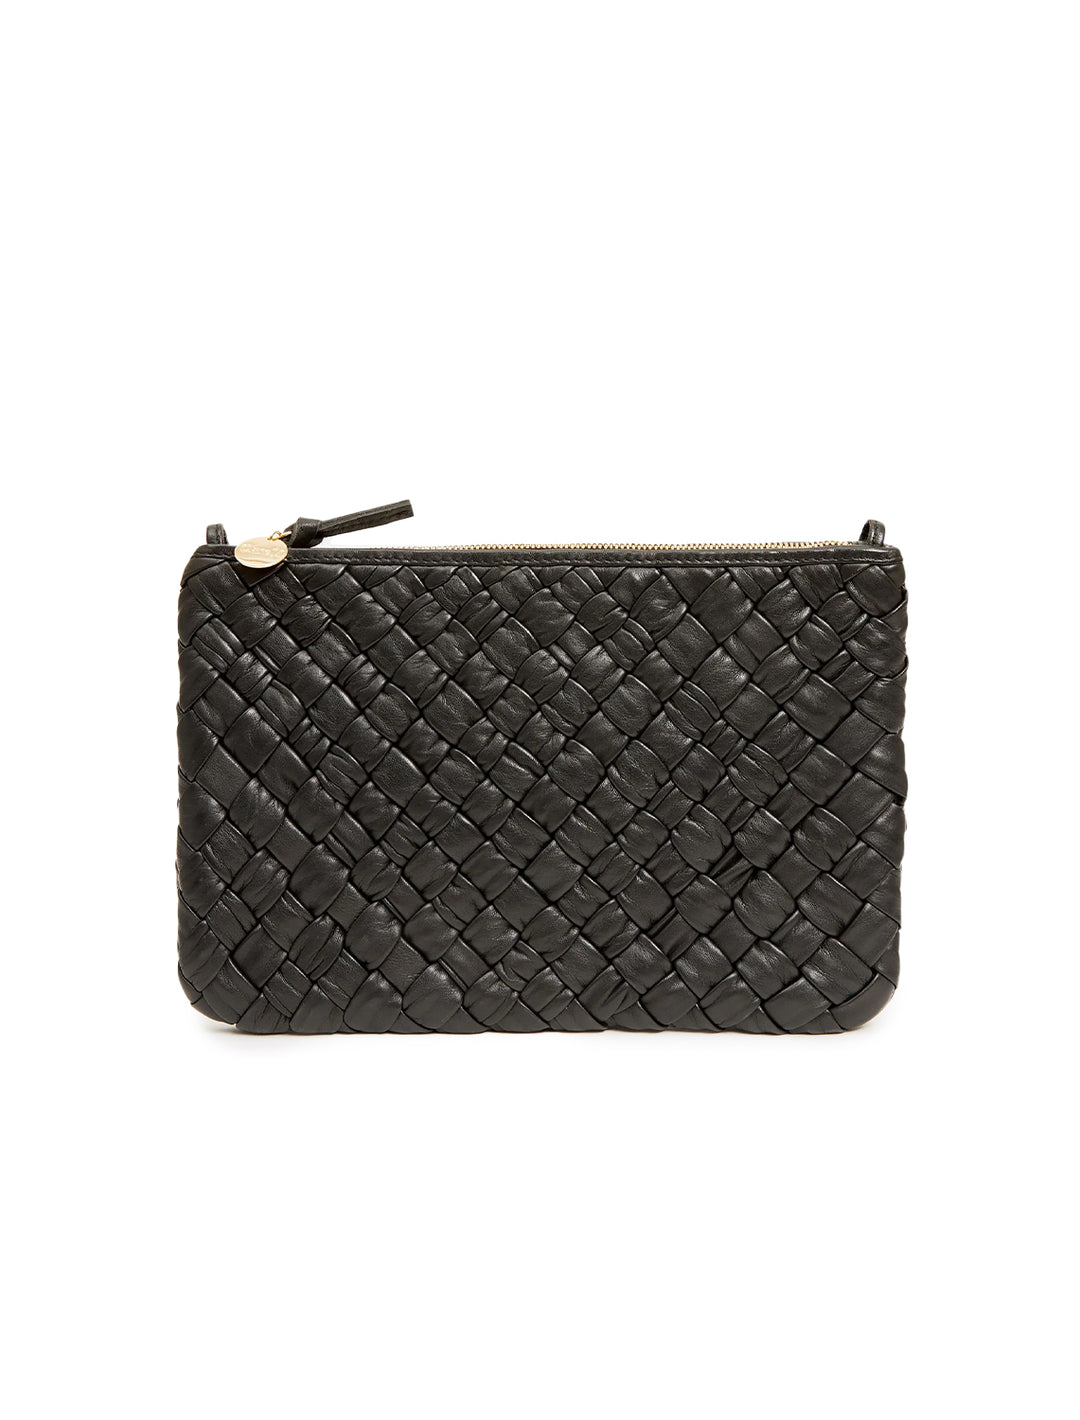 Front view of Clare V.'s flat clutch with tabs in puffy woven black.